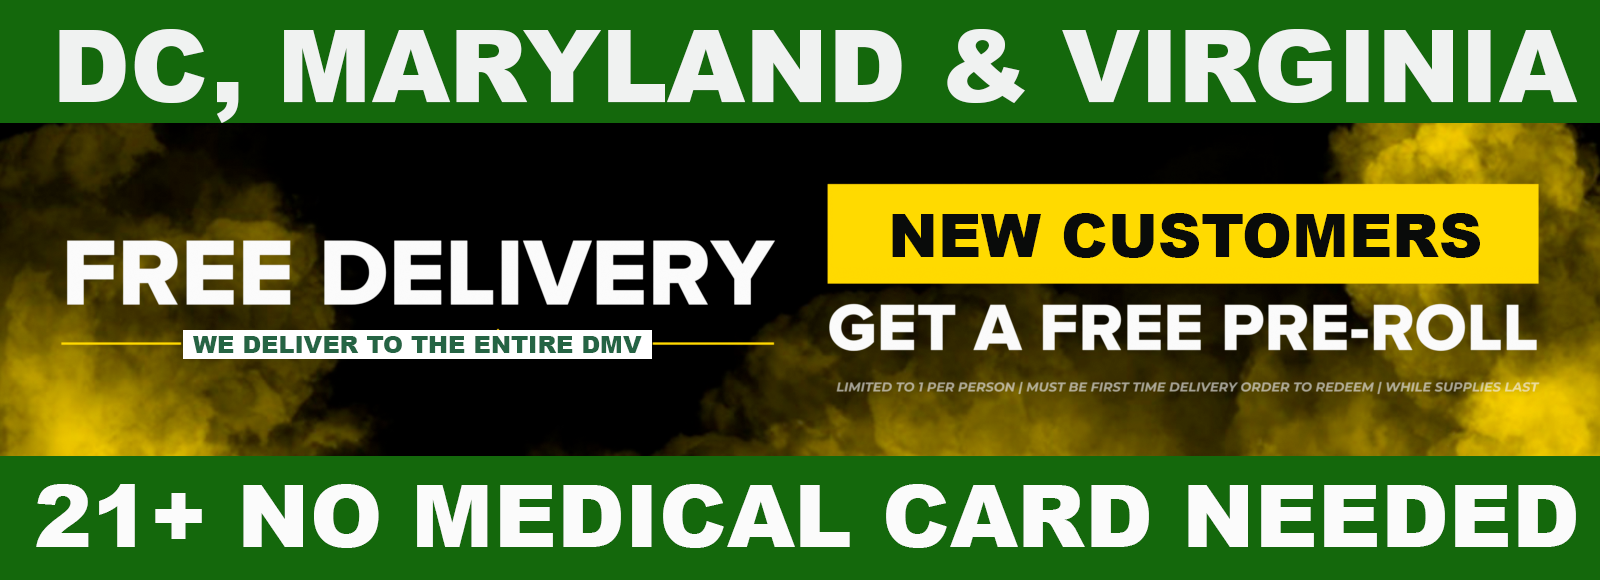 free delivery banner